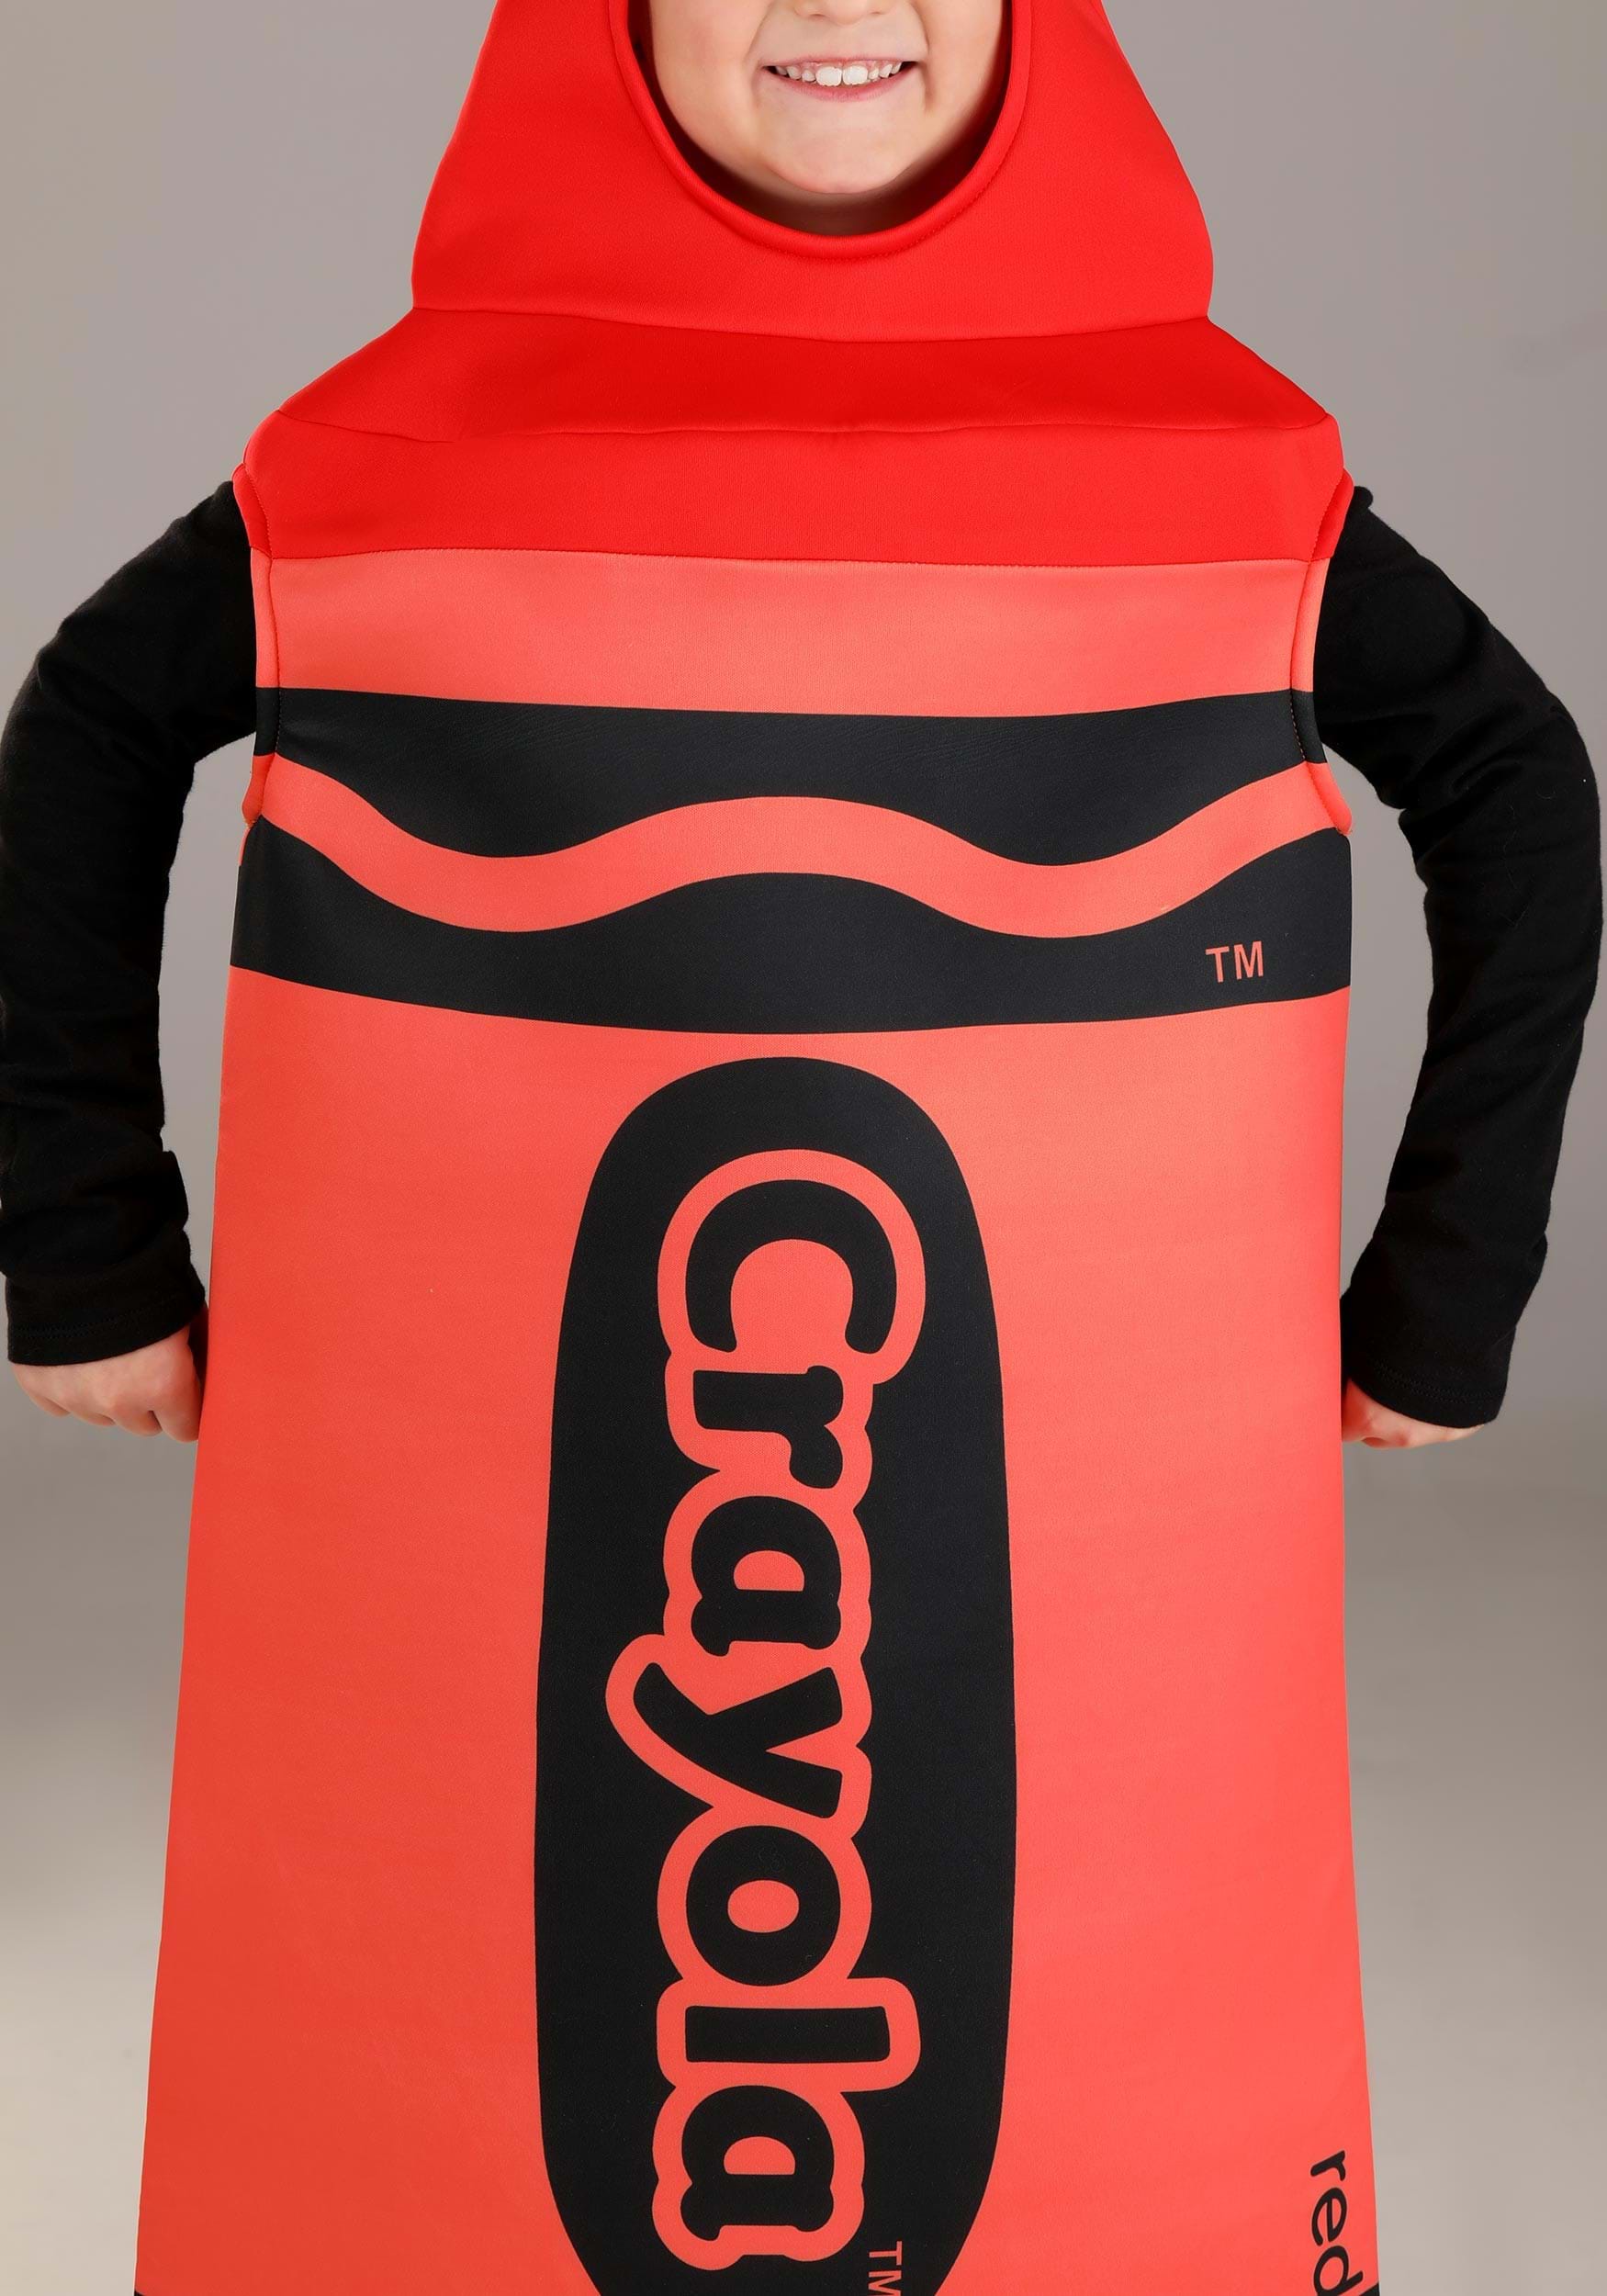 Red Crayola Crayon Costume For Kid's